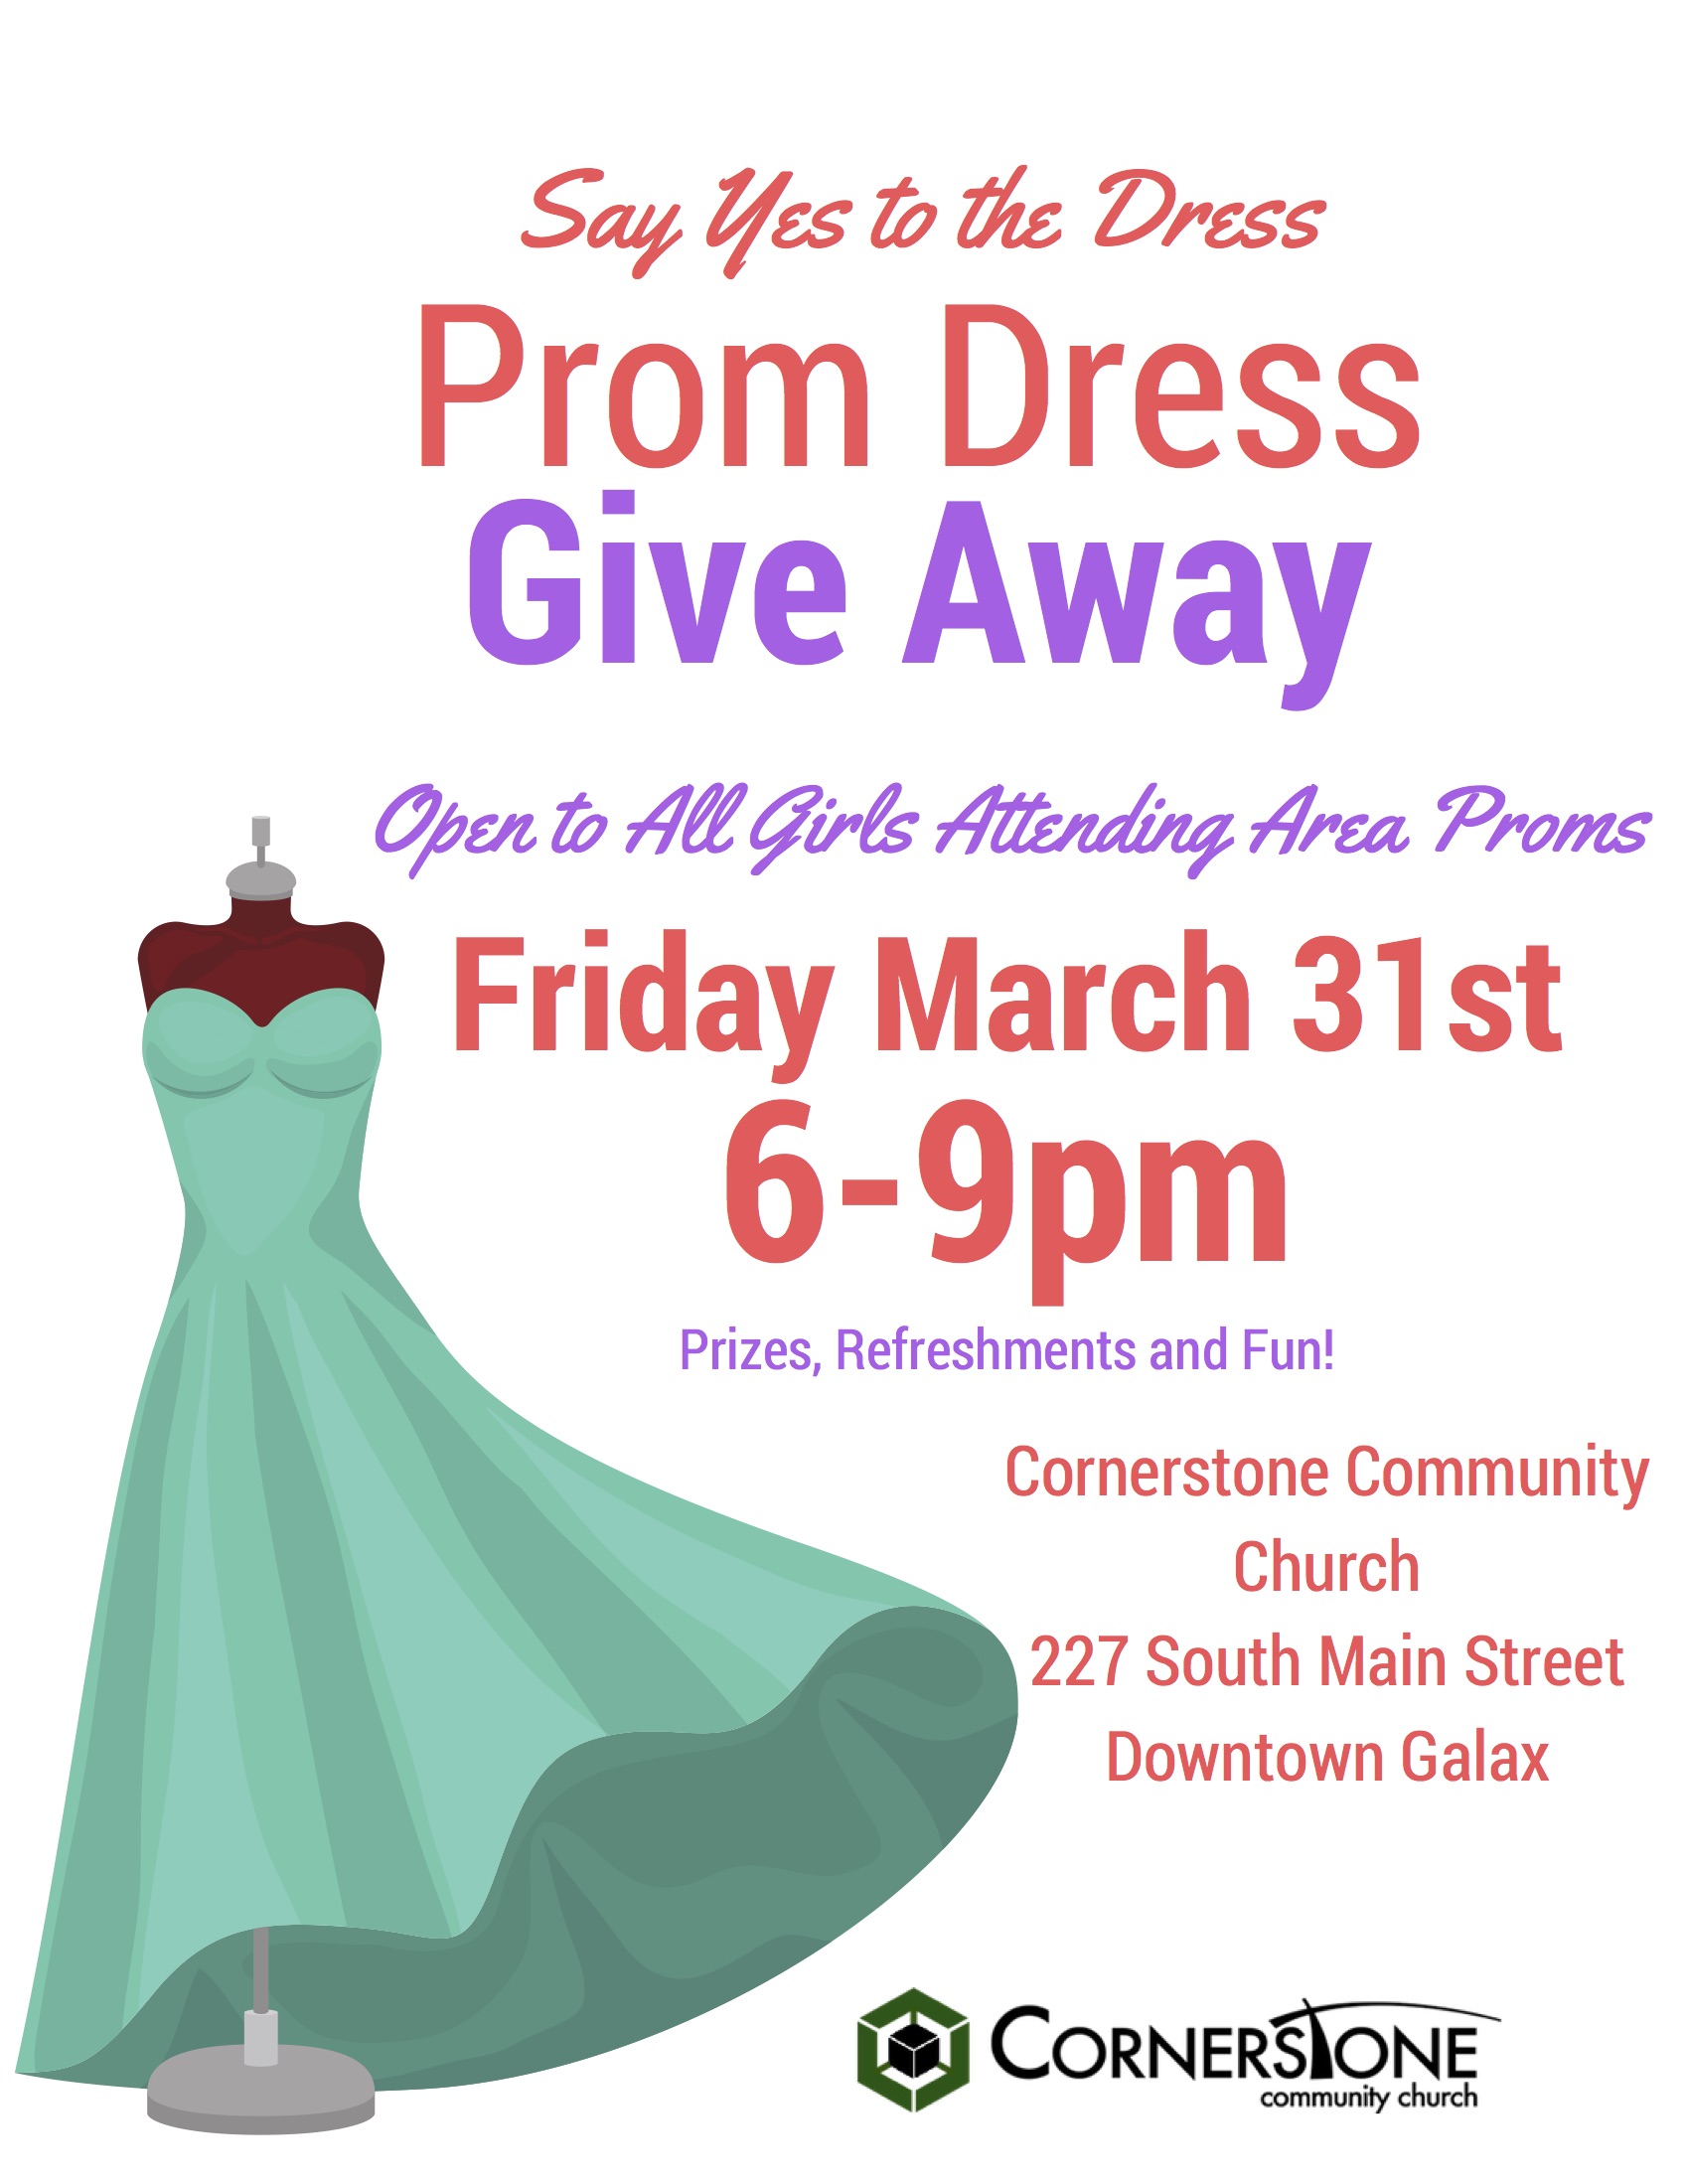 Say Yes to the Dress Prom Dress Give Away - Cornerstone Community Church